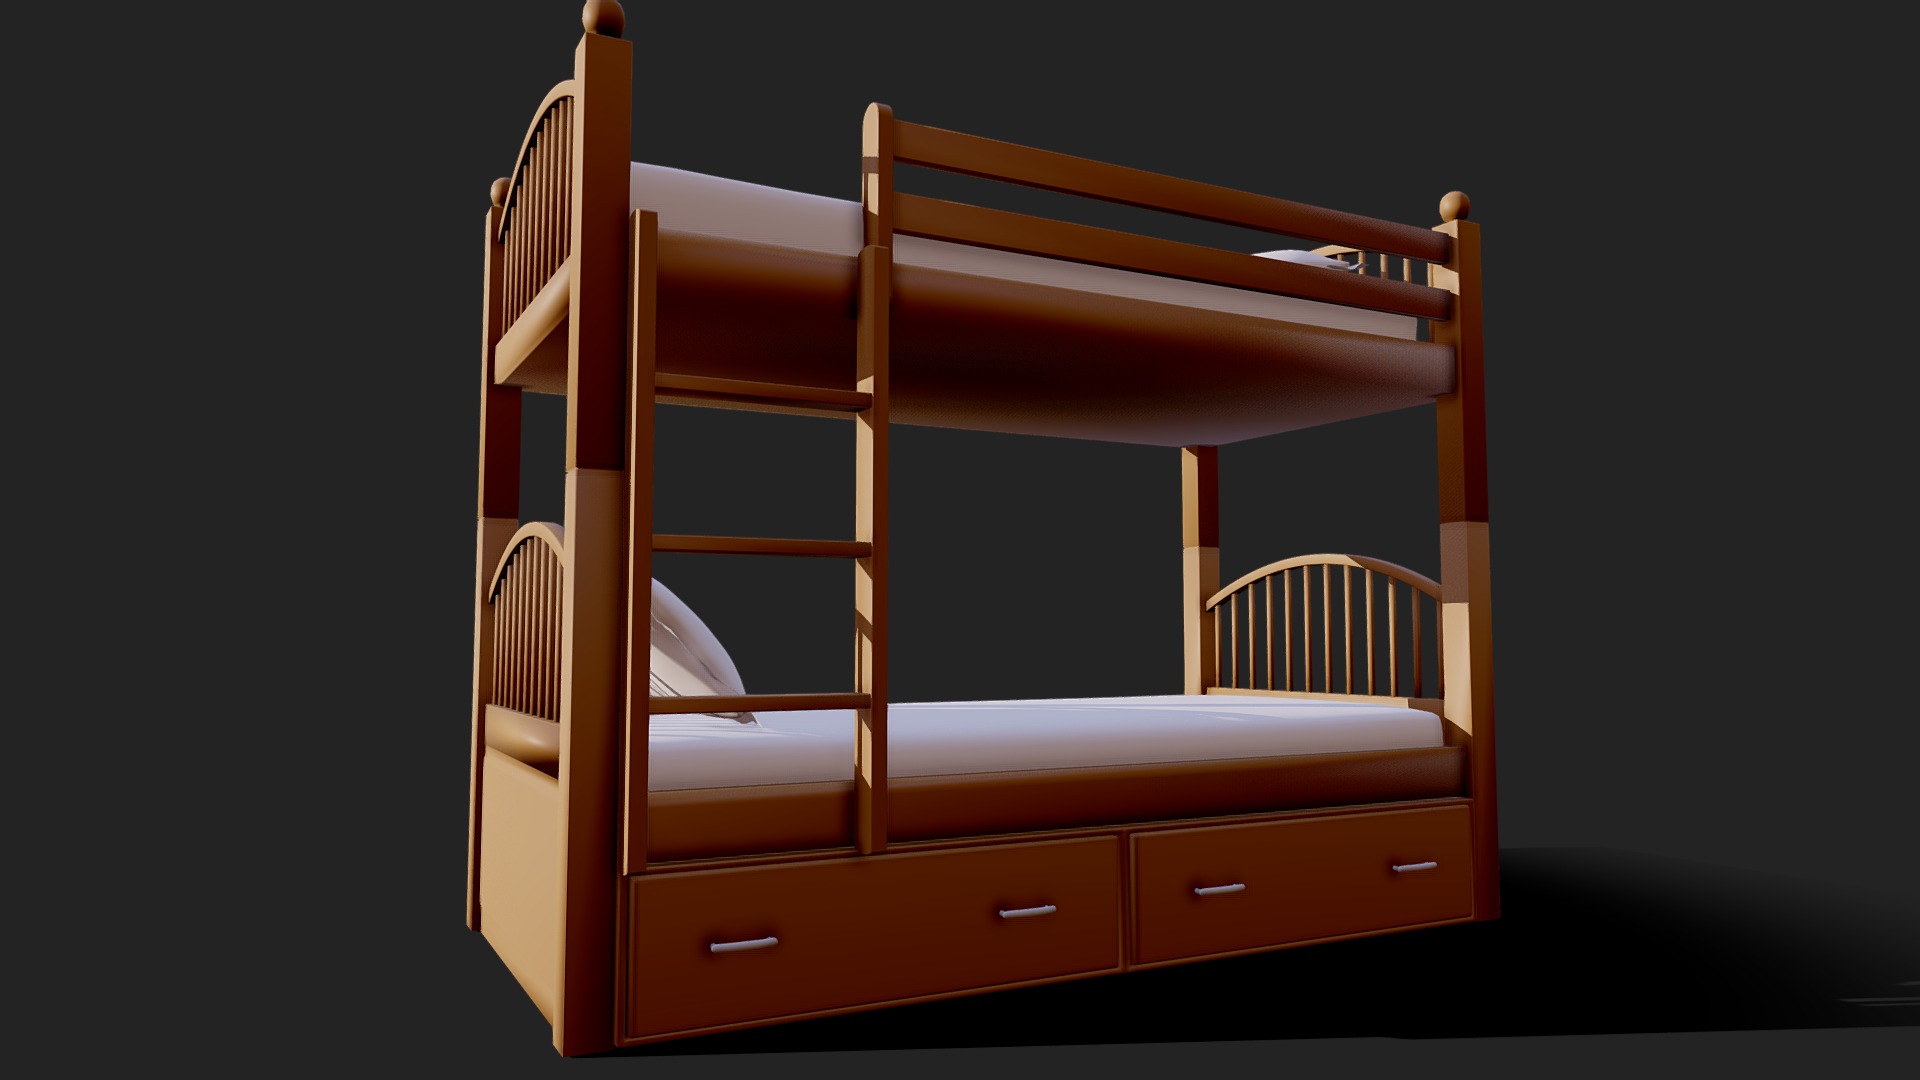 3D model 3D Bed 011 - This is a 3D model of the 3D Bed 011. The 3D model is about a wooden bunk bed.